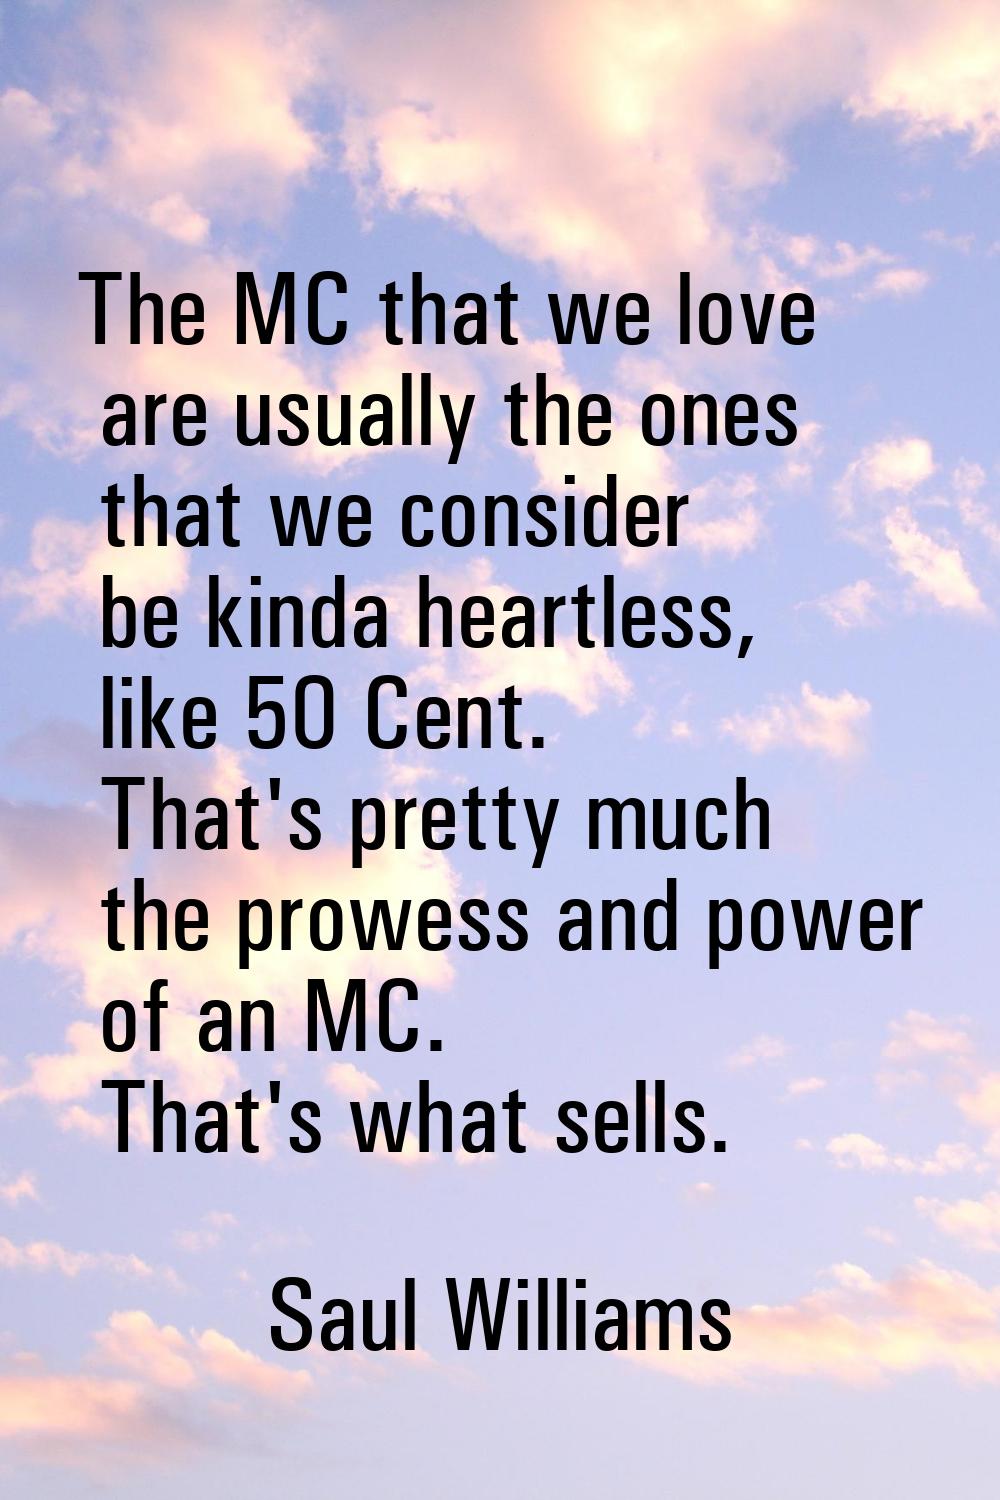 The MC that we love are usually the ones that we consider be kinda heartless, like 50 Cent. That's 